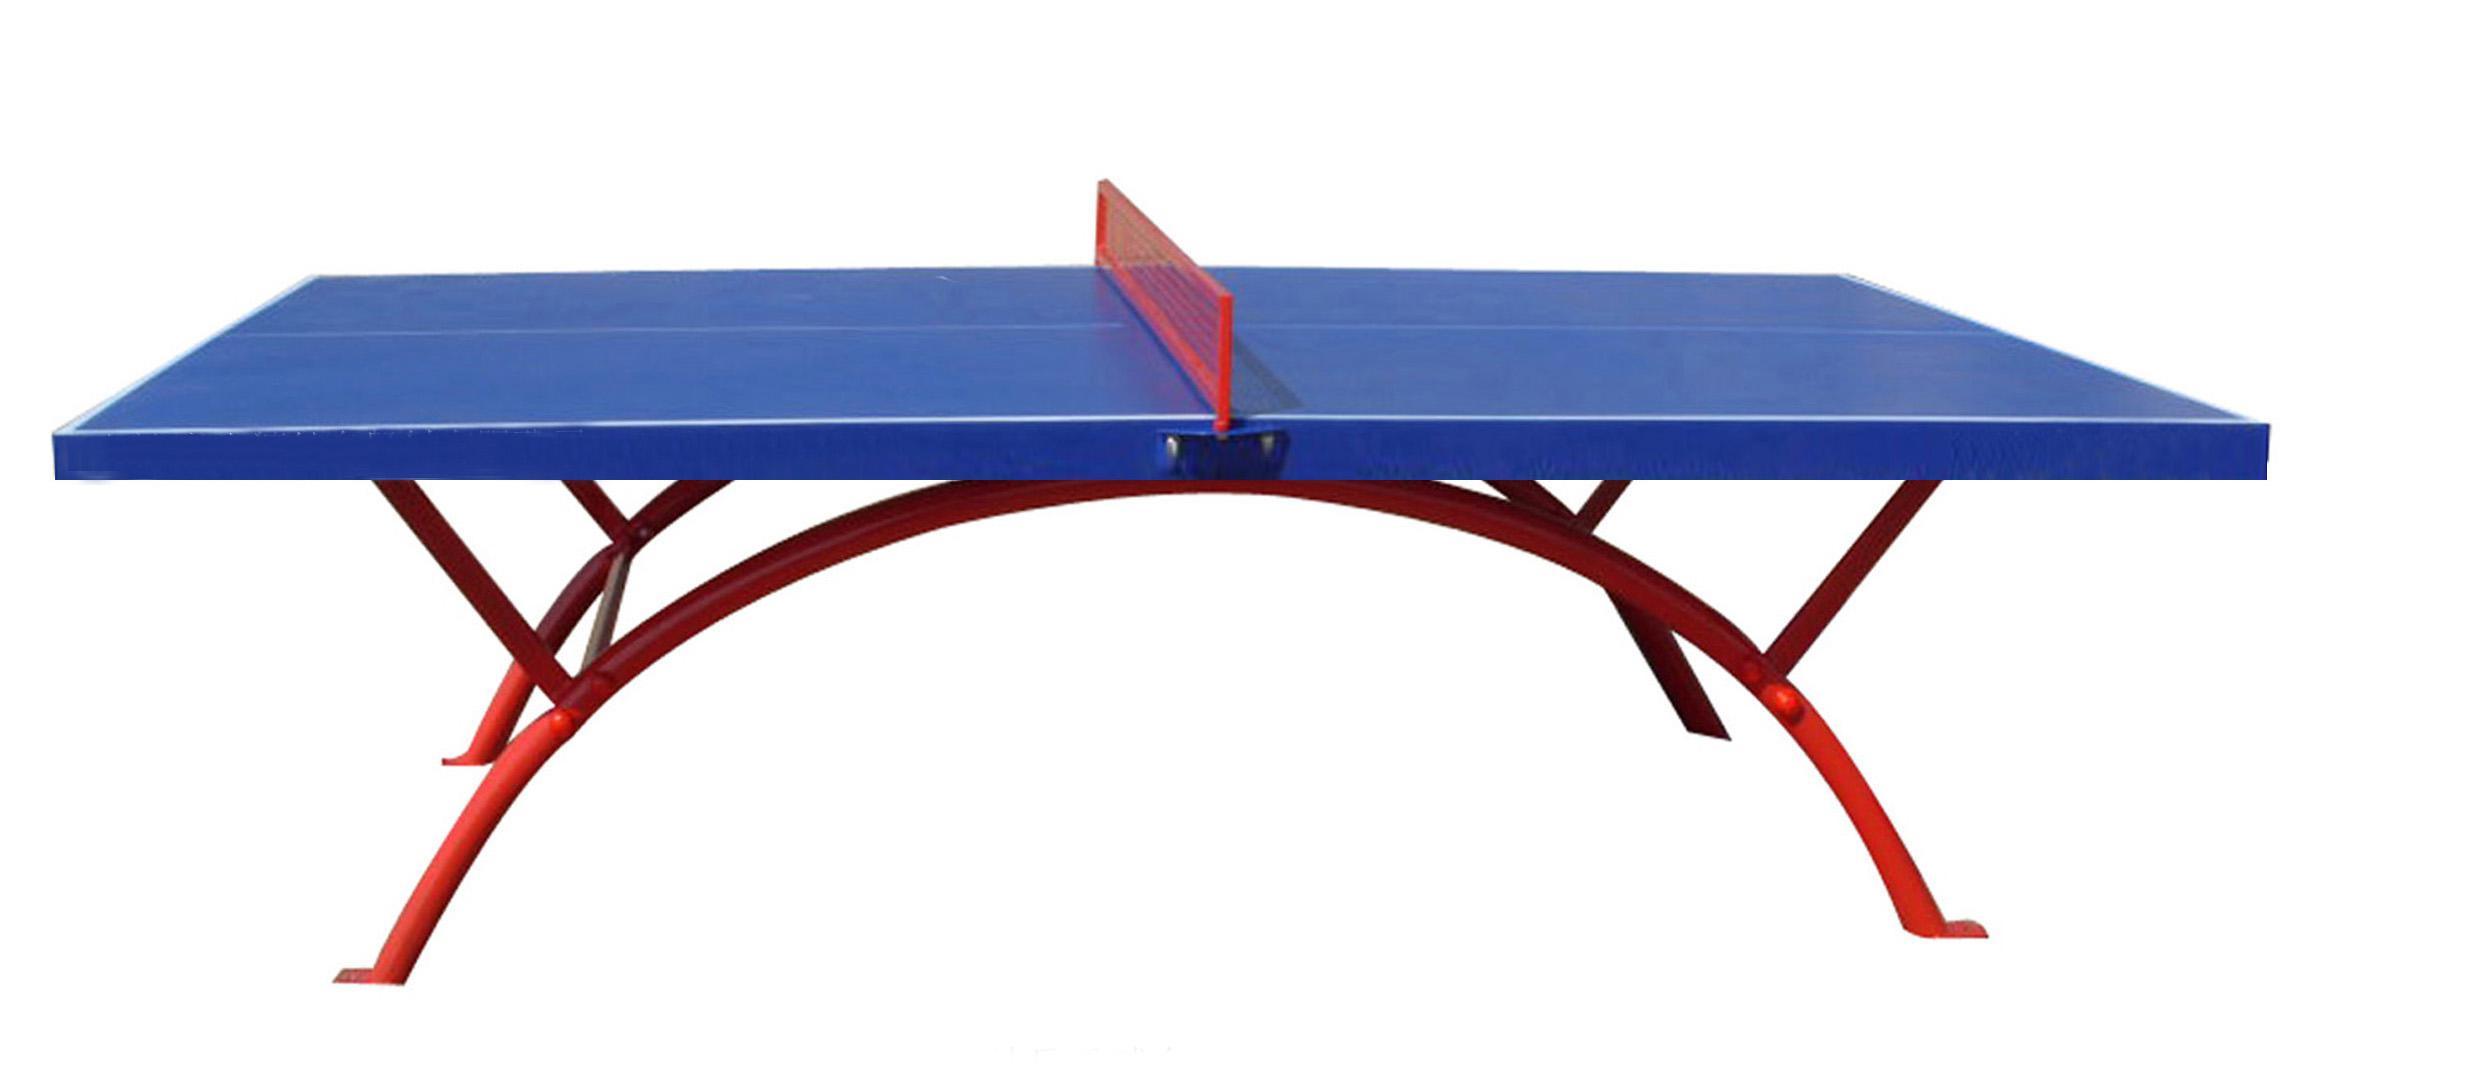 Sporting Goods -Outdoor Table Tennis Table